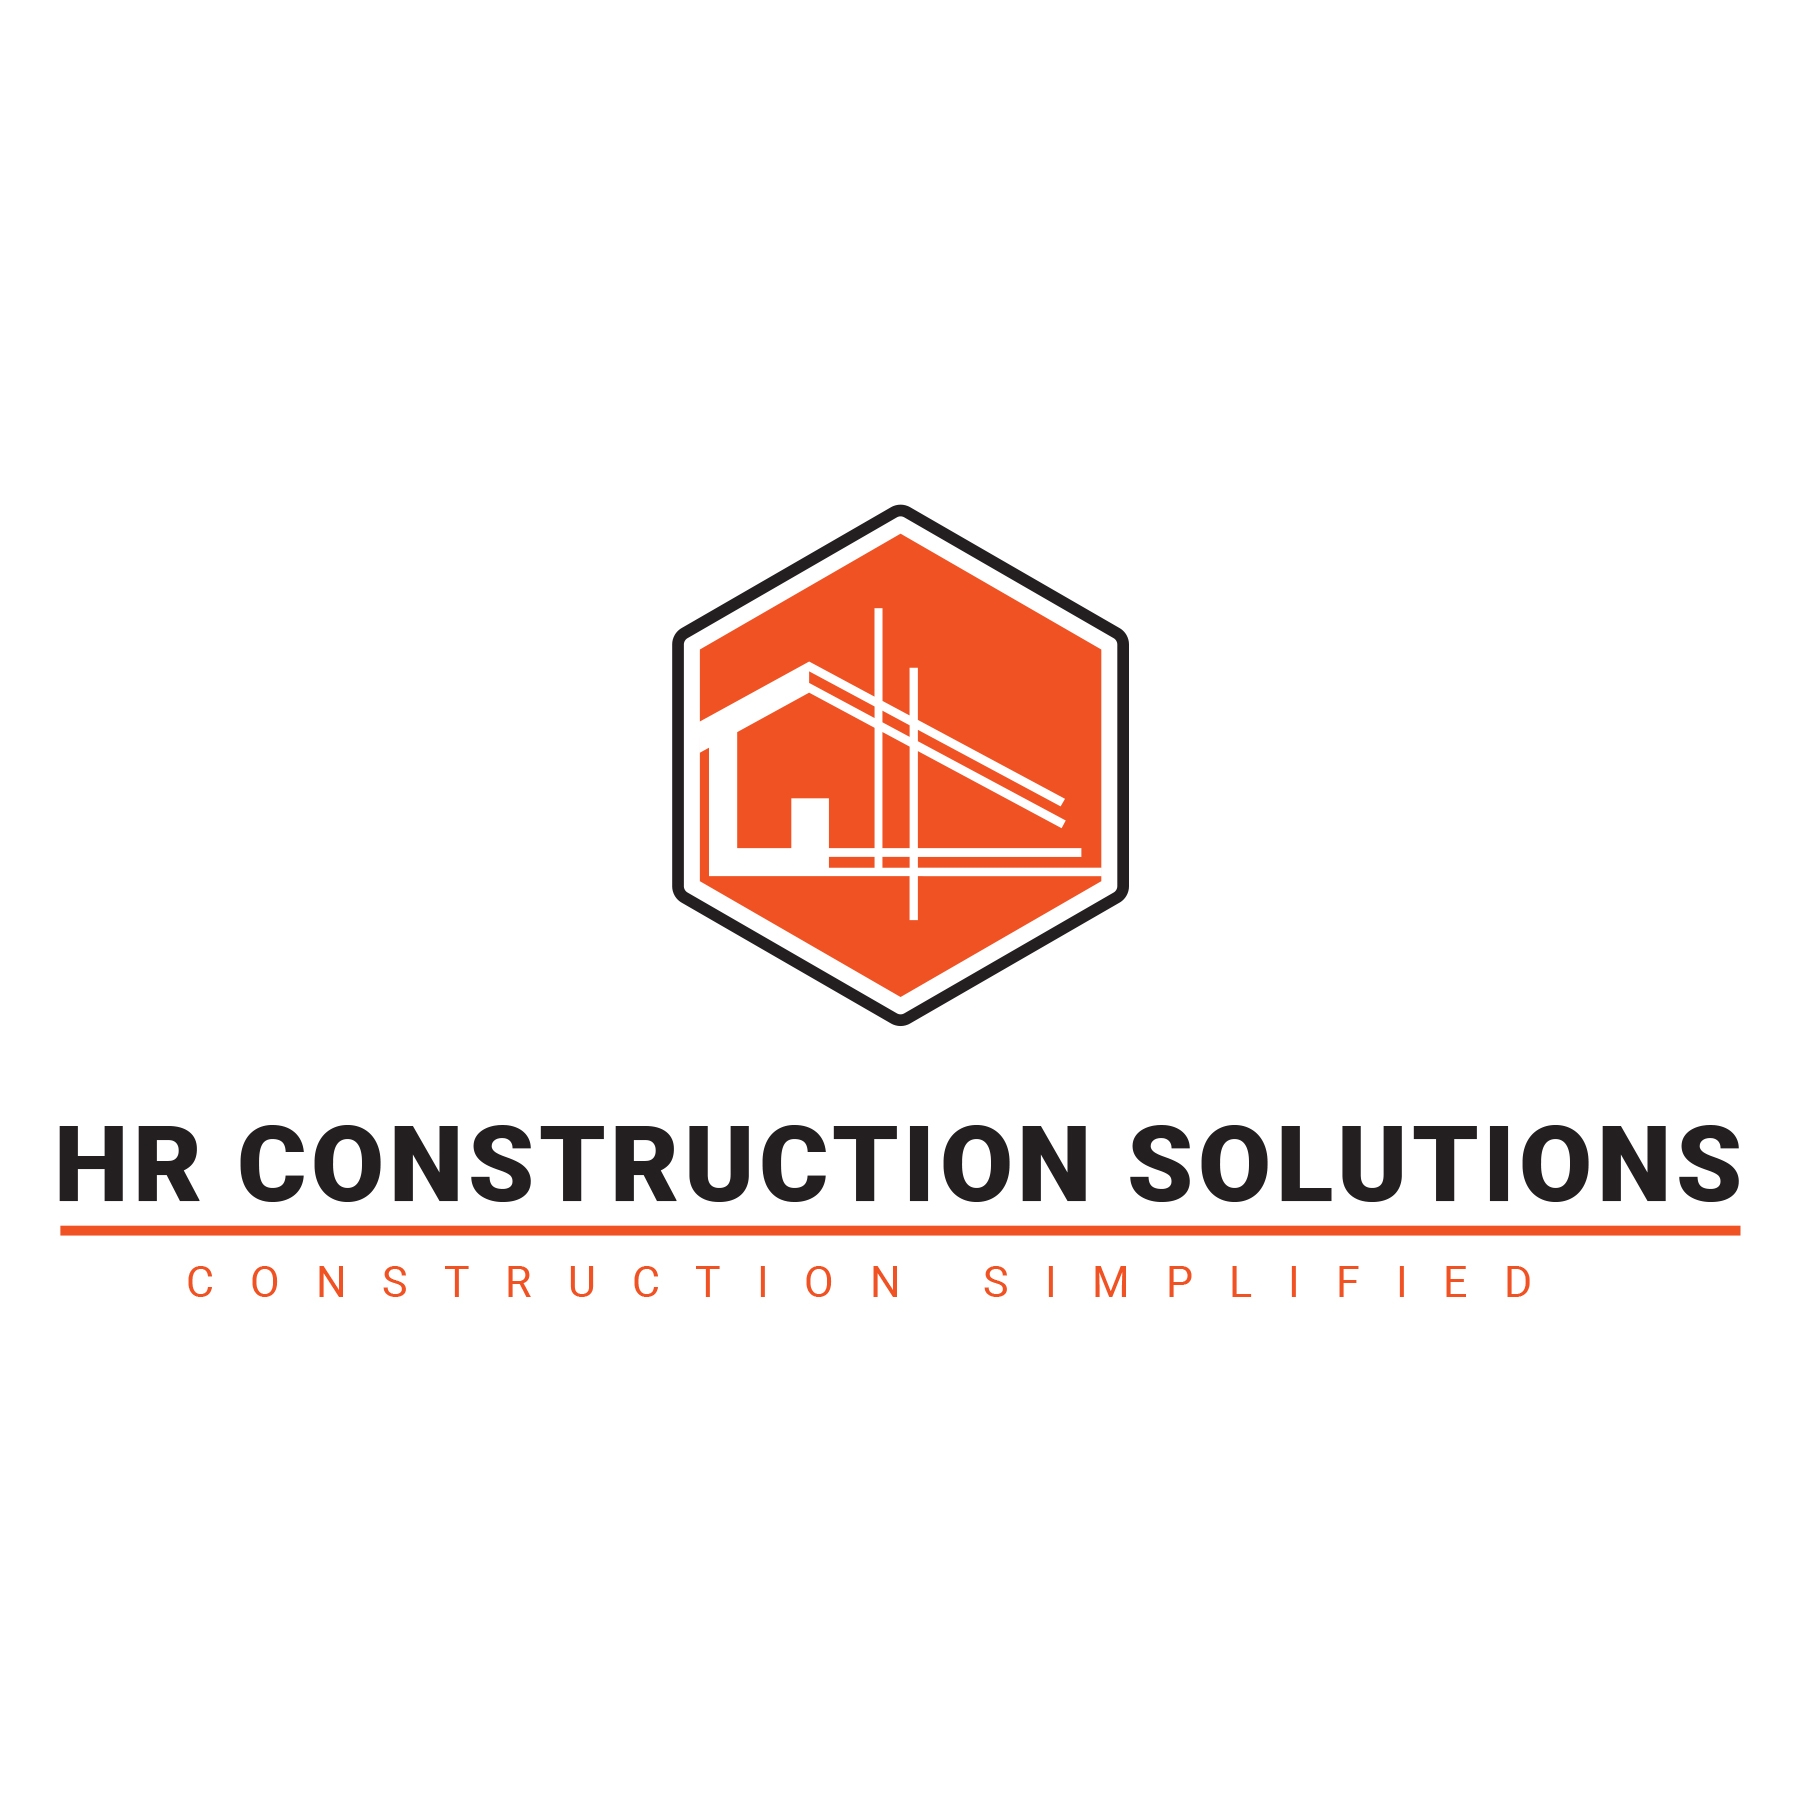 HR Construction Solutions|Accounting Services|Professional Services